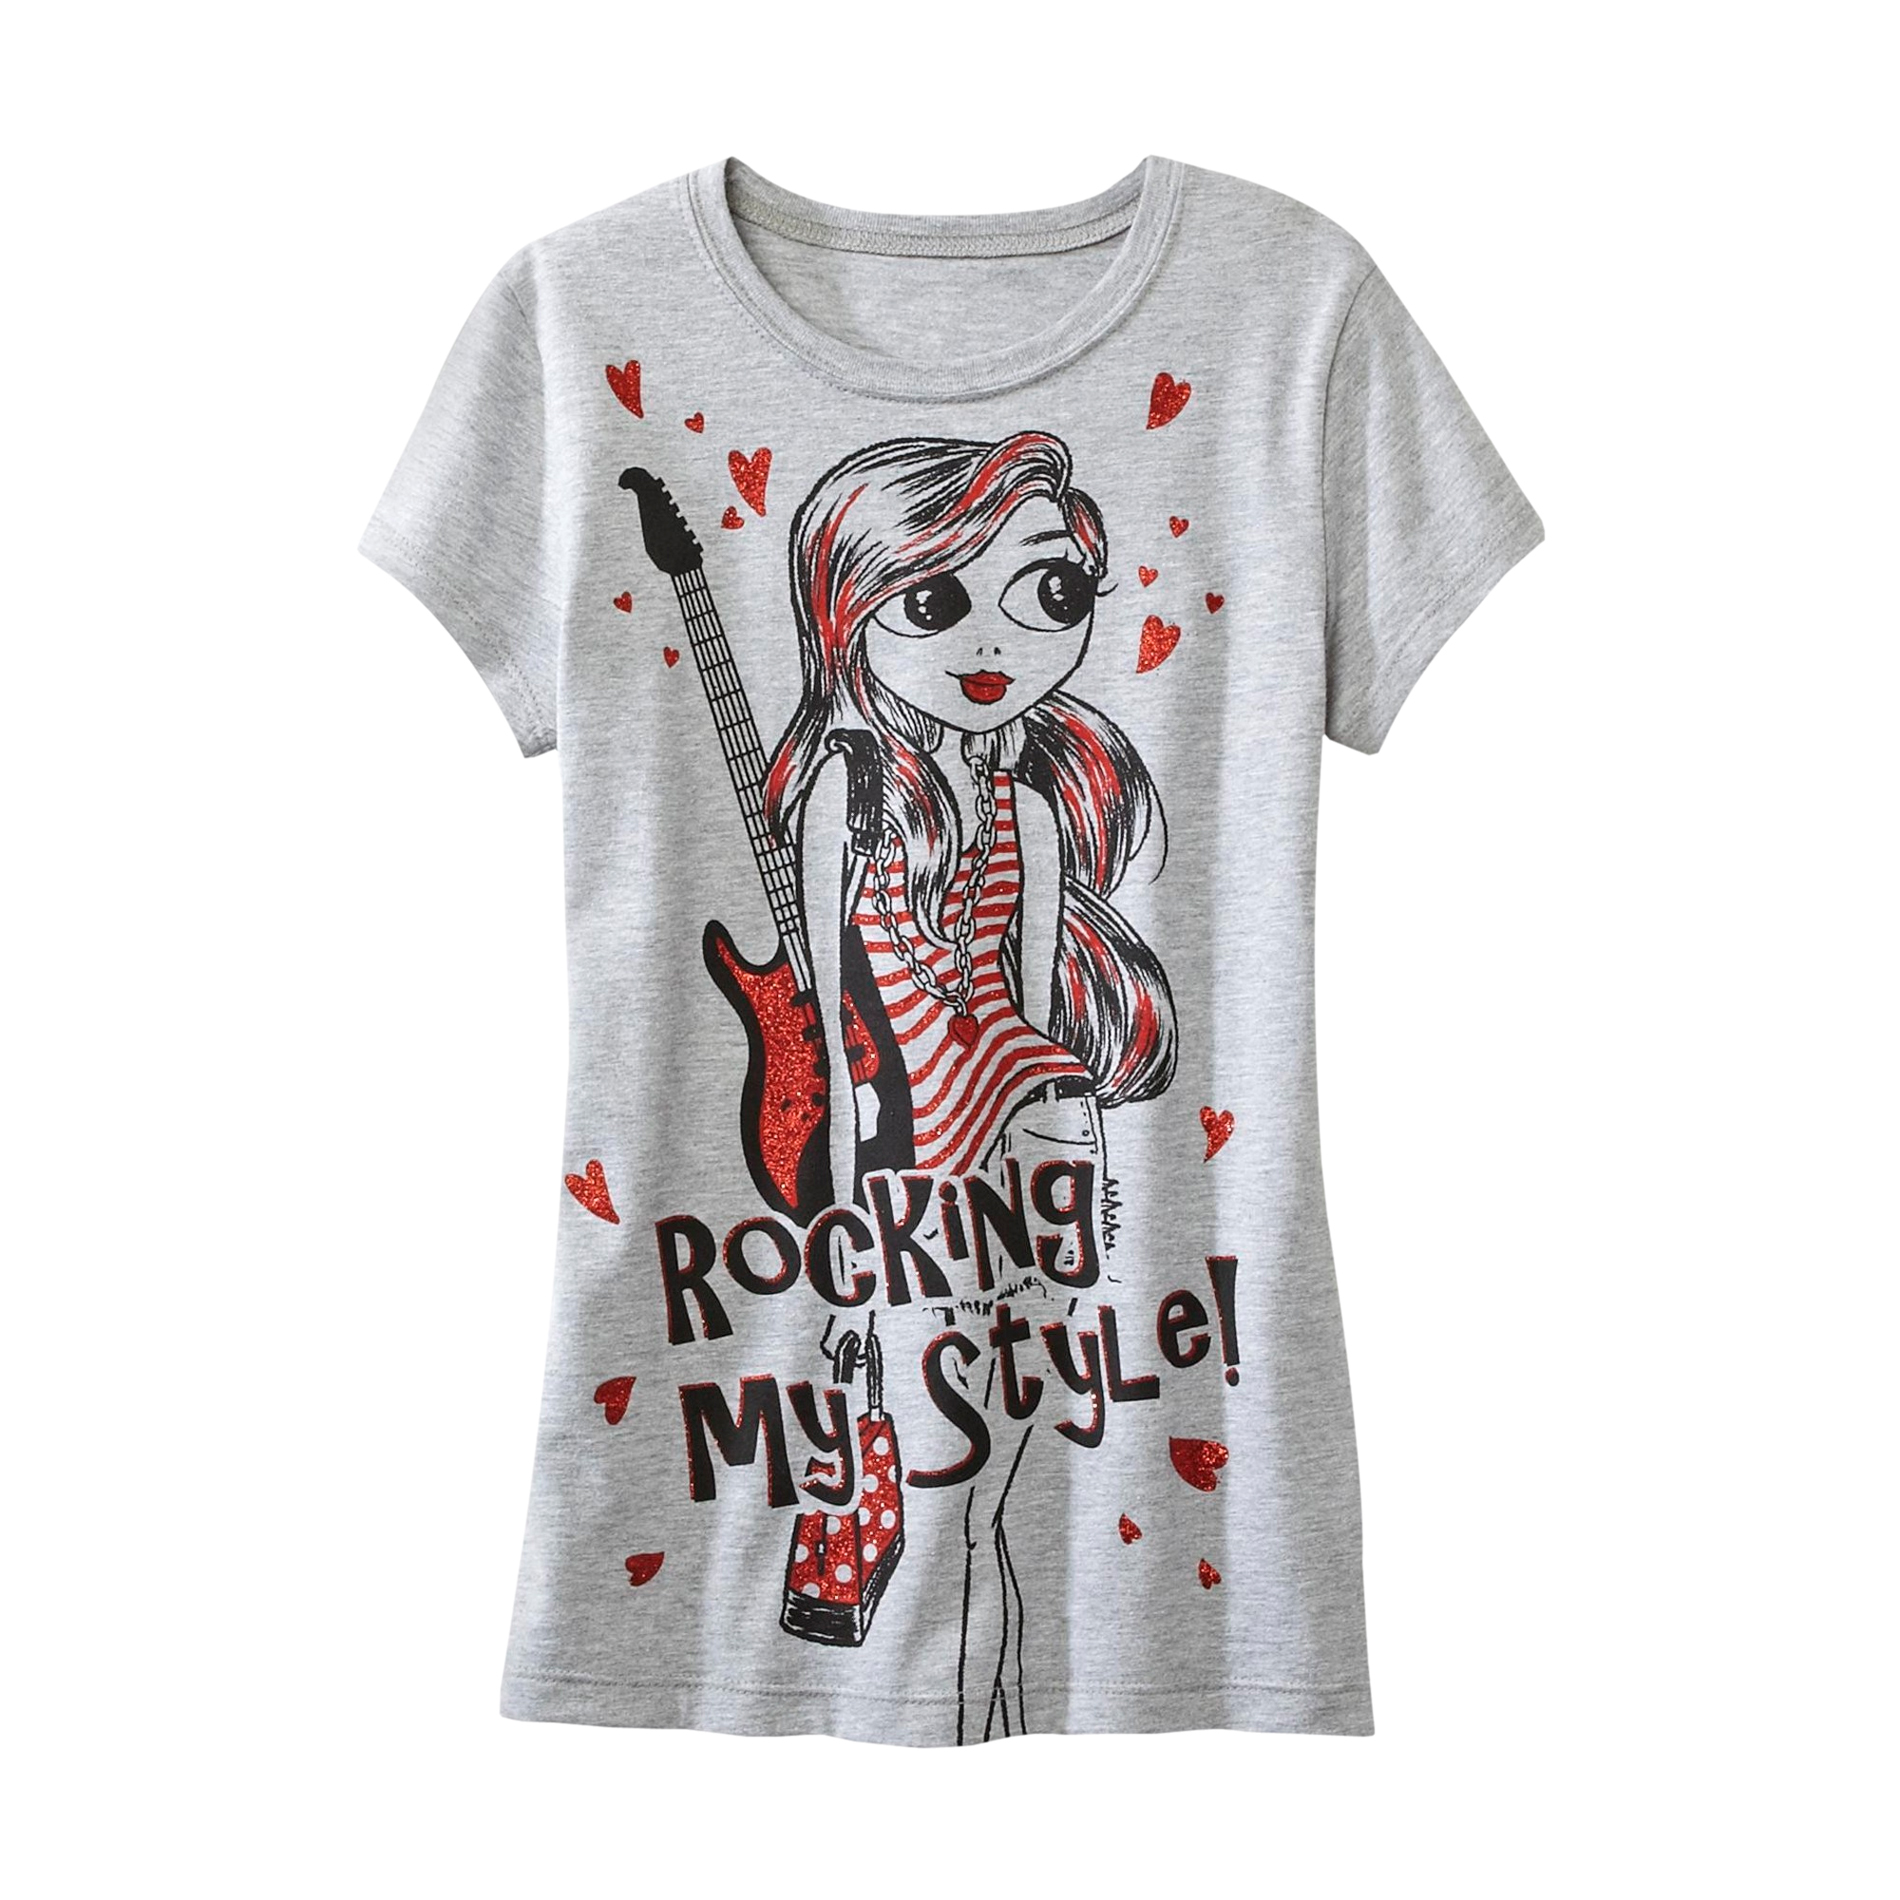 Jerry Leigh Girl's Graphic T-Shirt - Rocking My Style